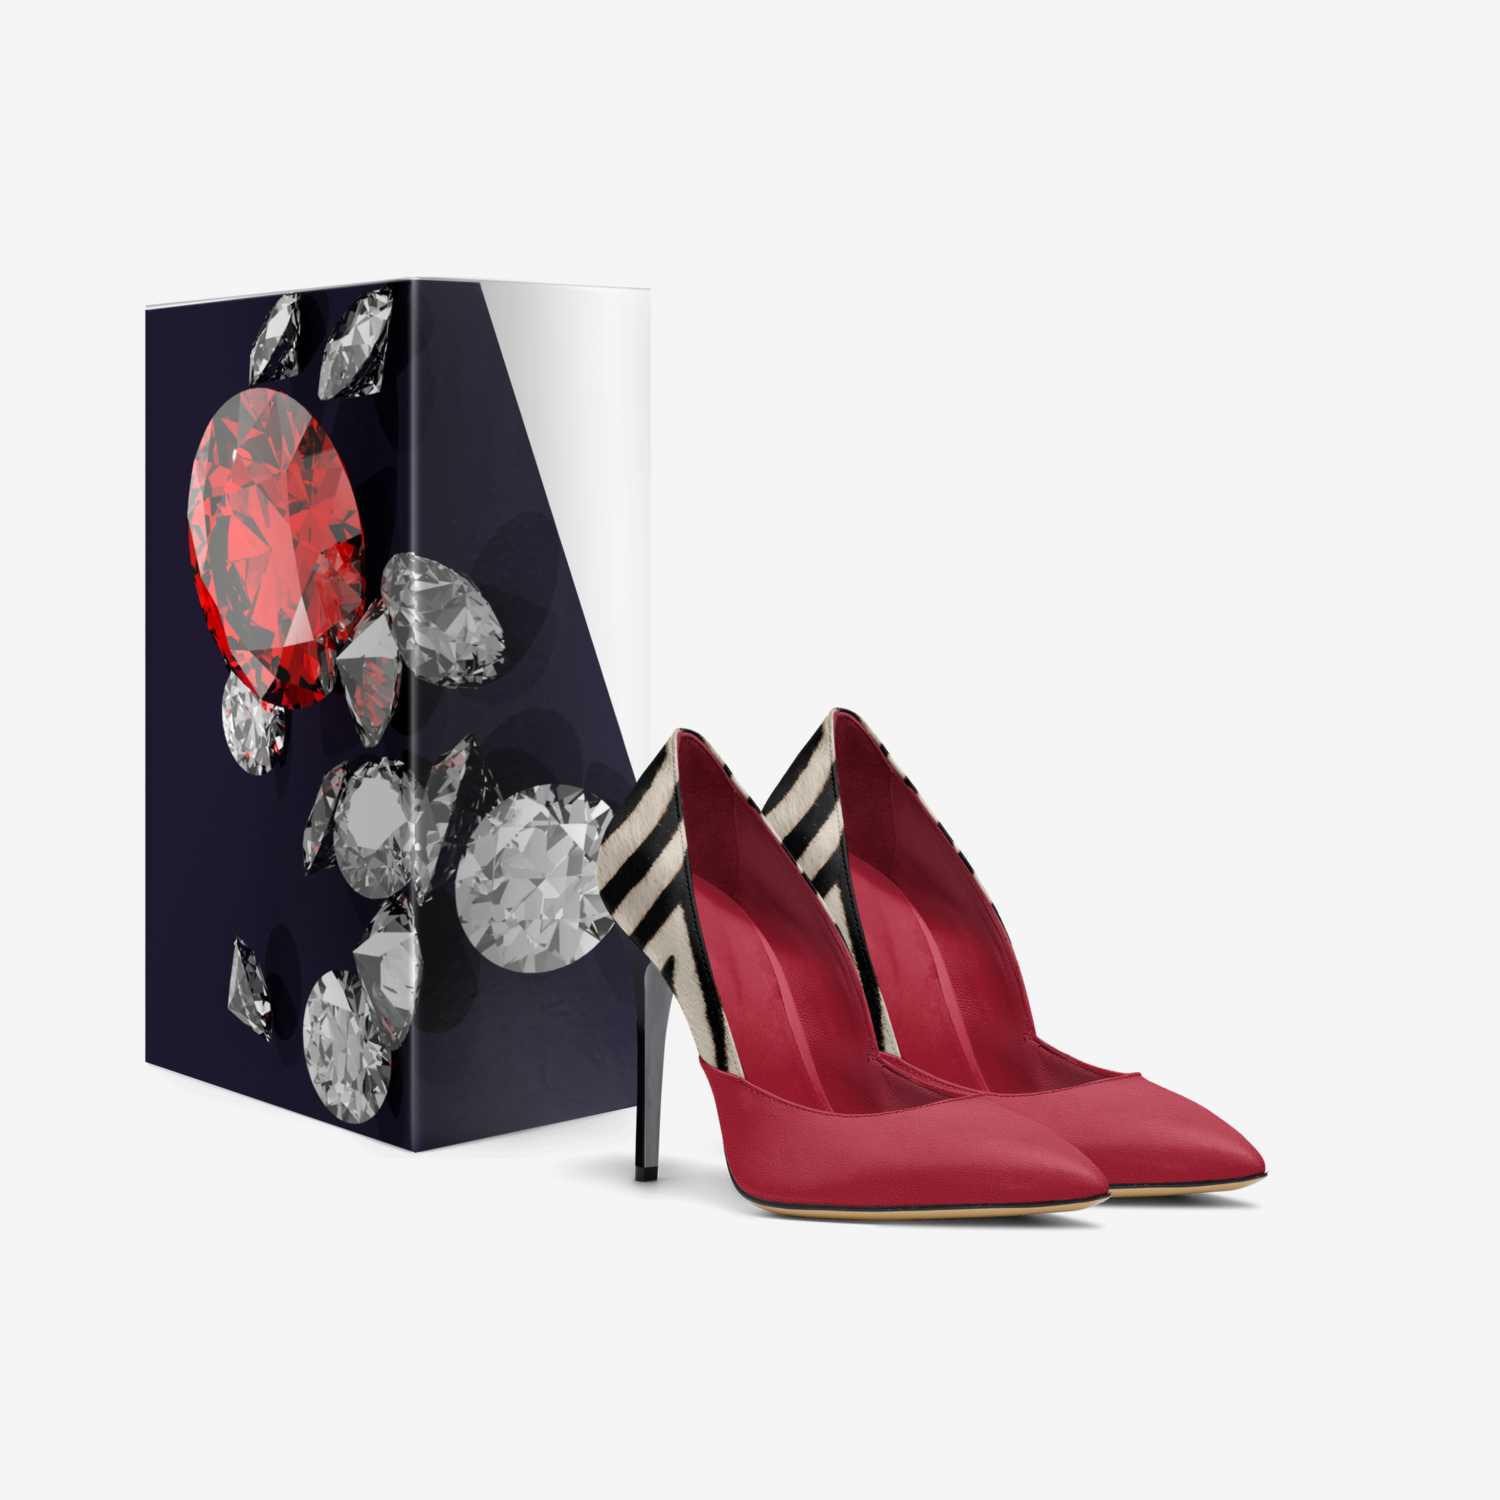 Lady Jacqueline custom made in Italy shoes by Dr.jacqueline Mohair | Box view